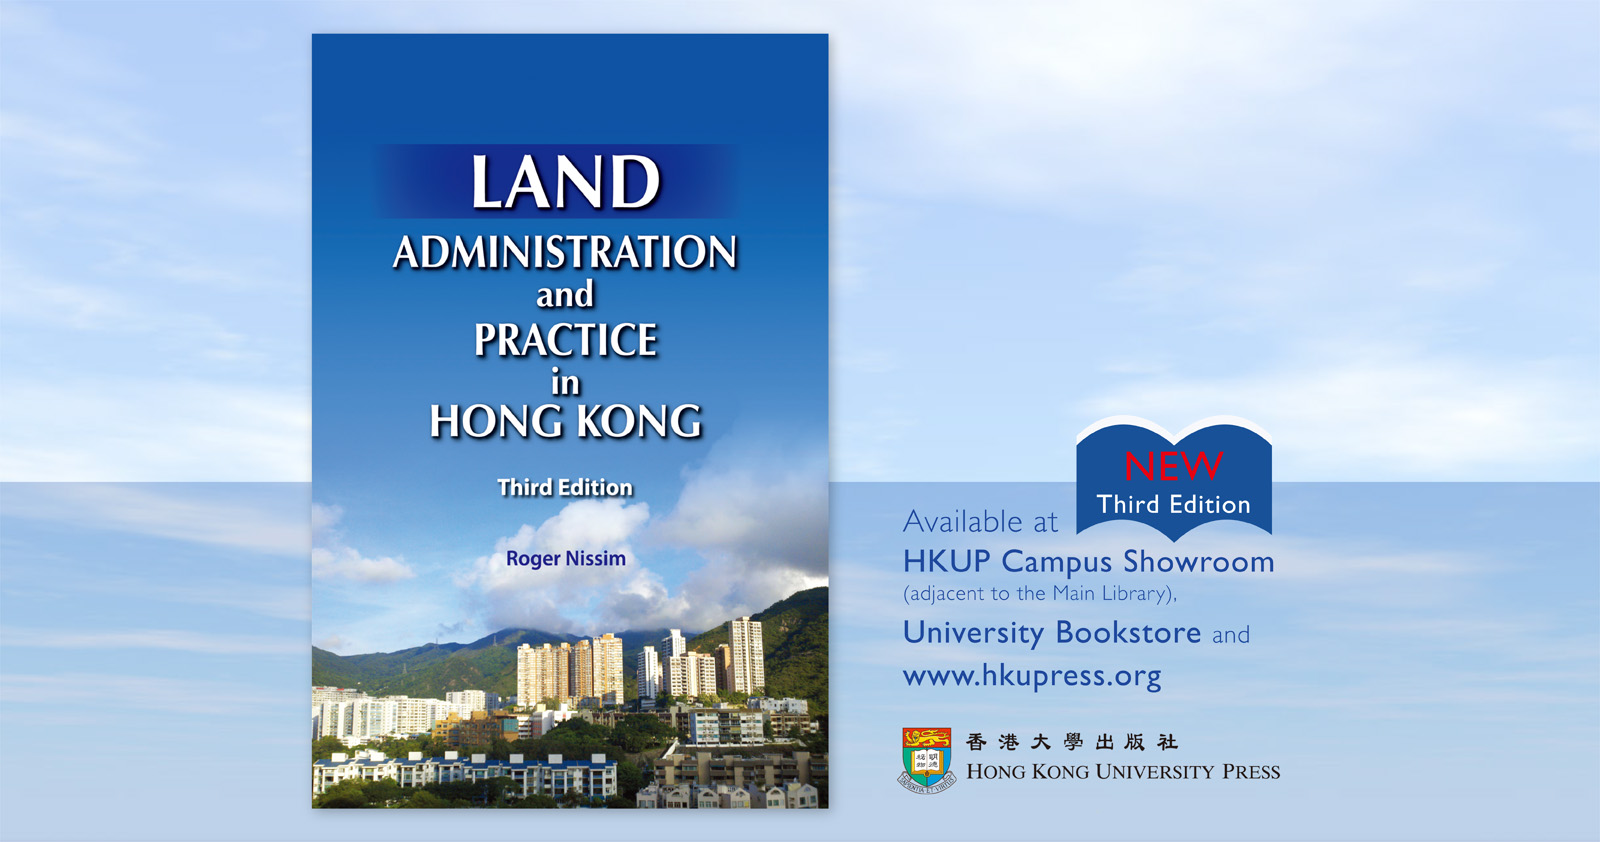 New Book Release - Land Administration and Practice in Hong Kong, Third Edition